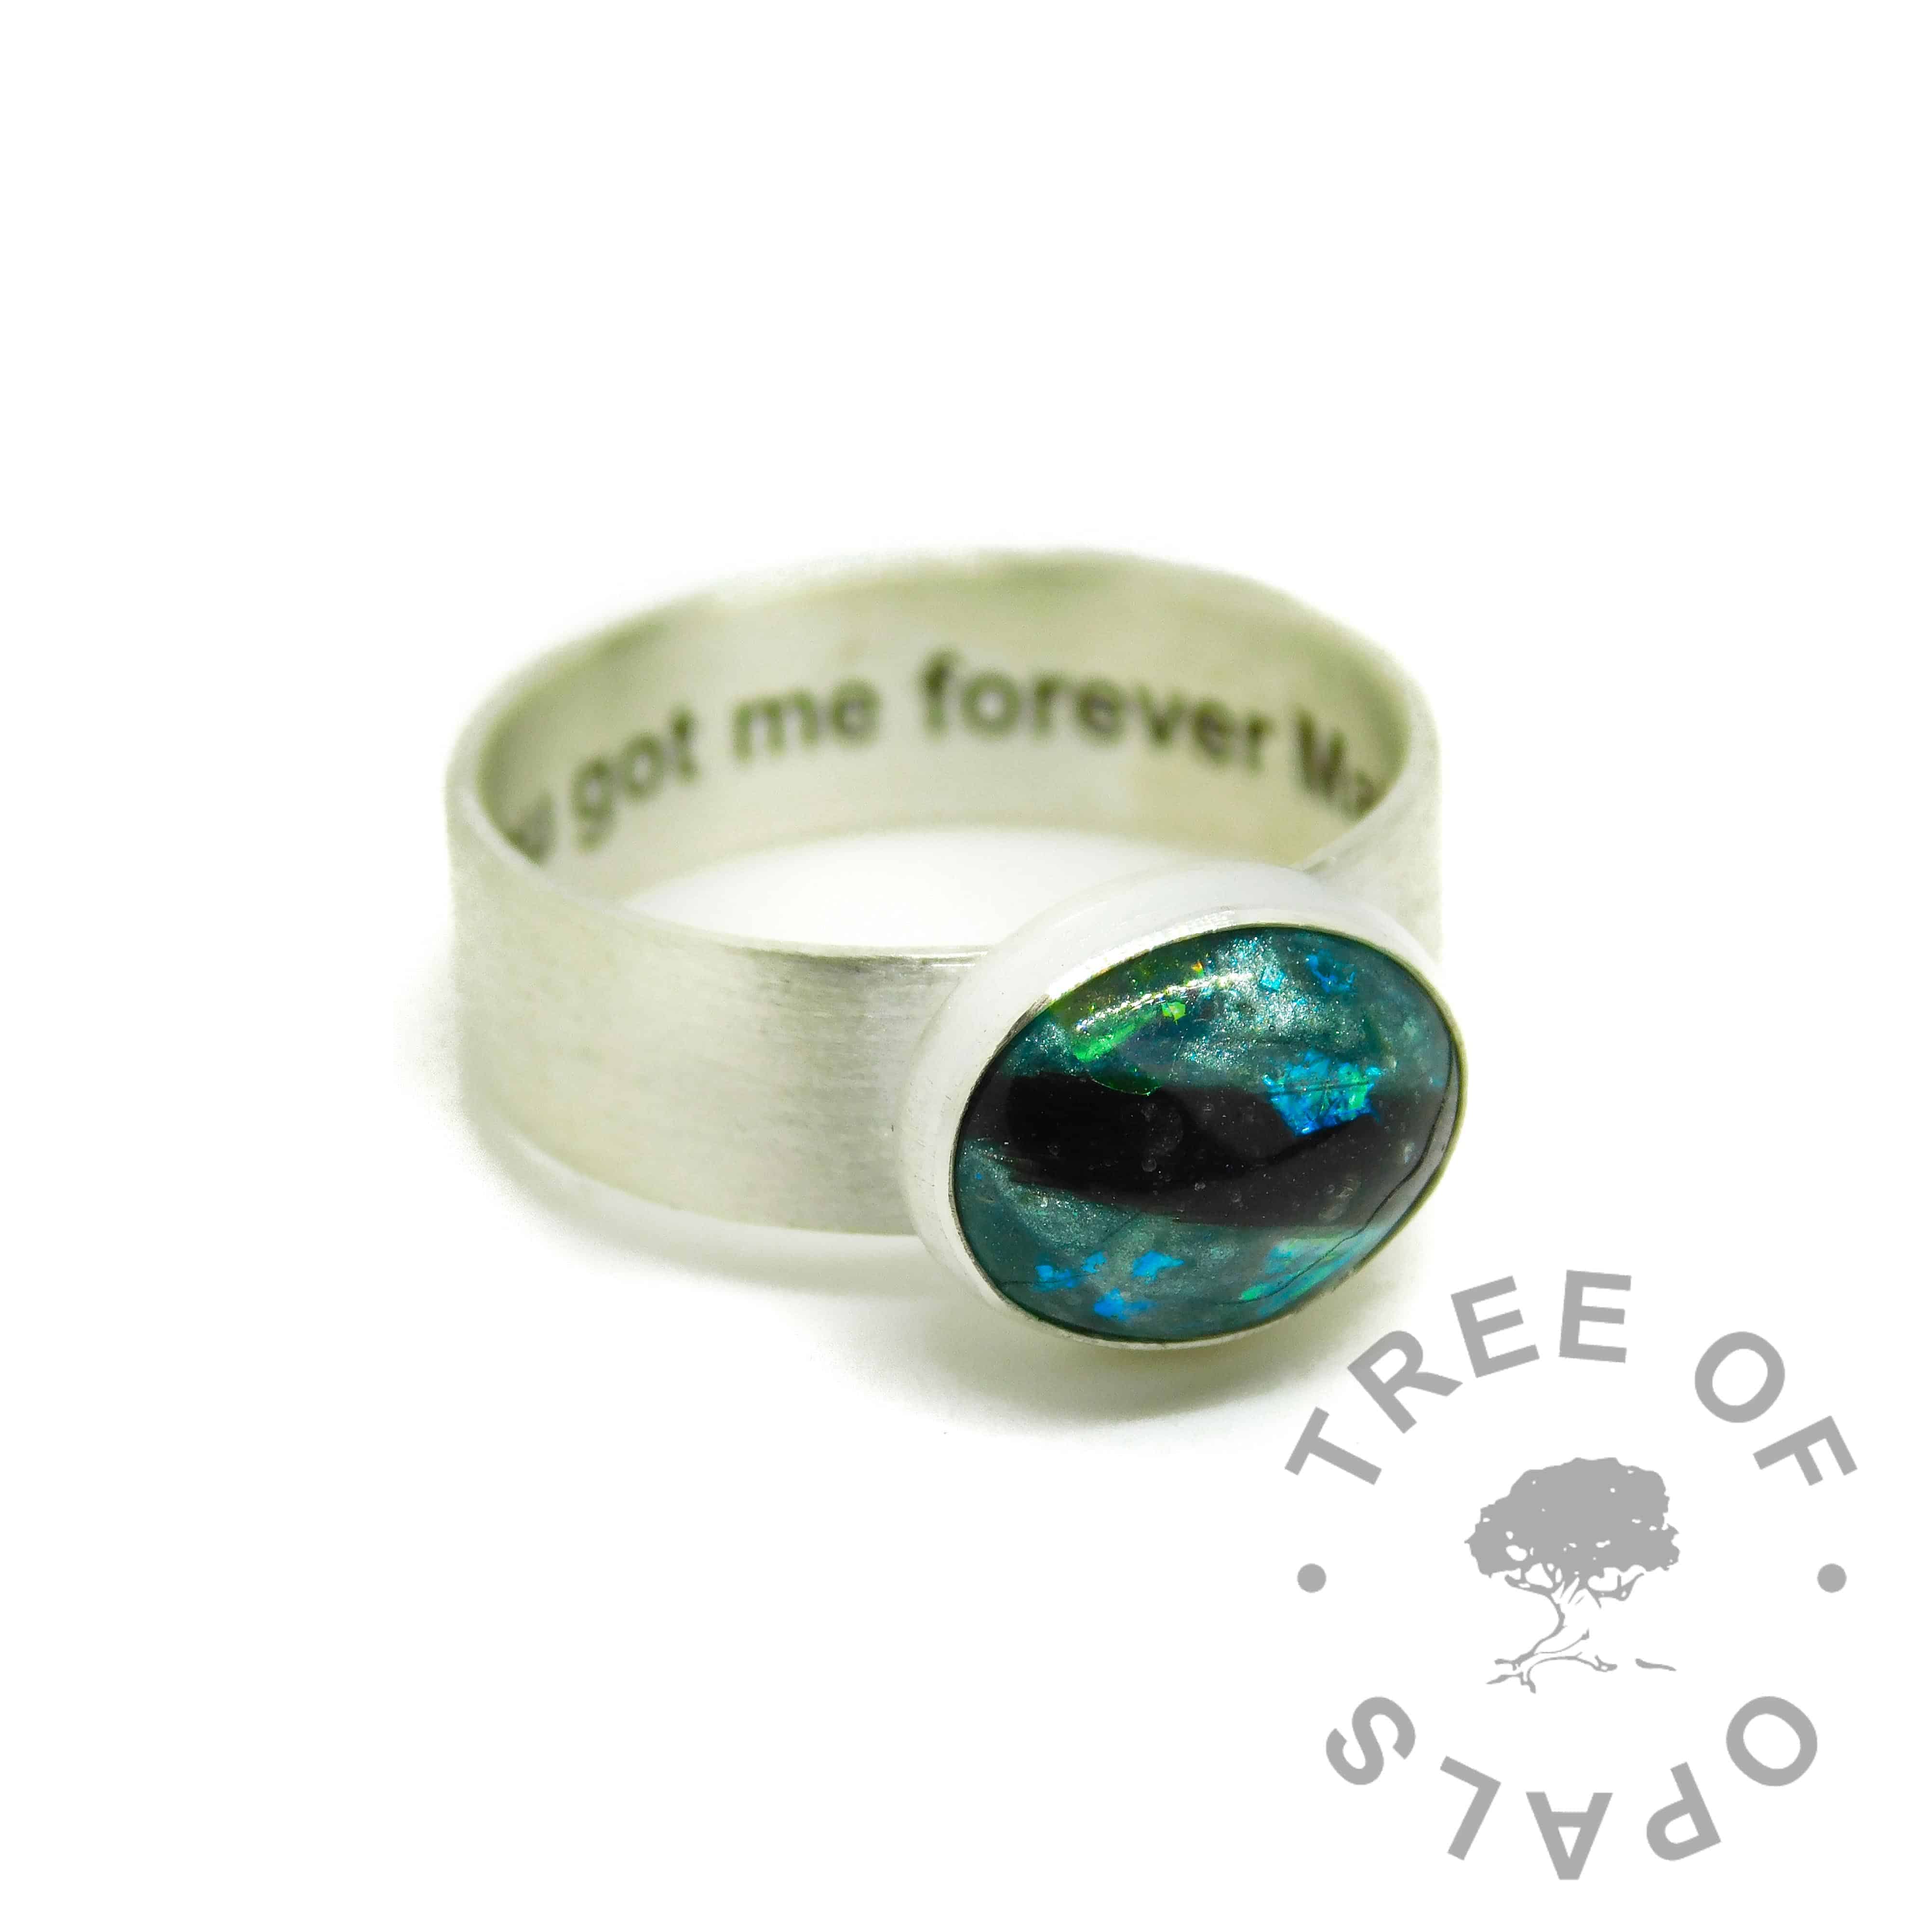 mermaid teal resin sparkle mix and hair ring, 6mm wide shiny band engraved inside with arial font